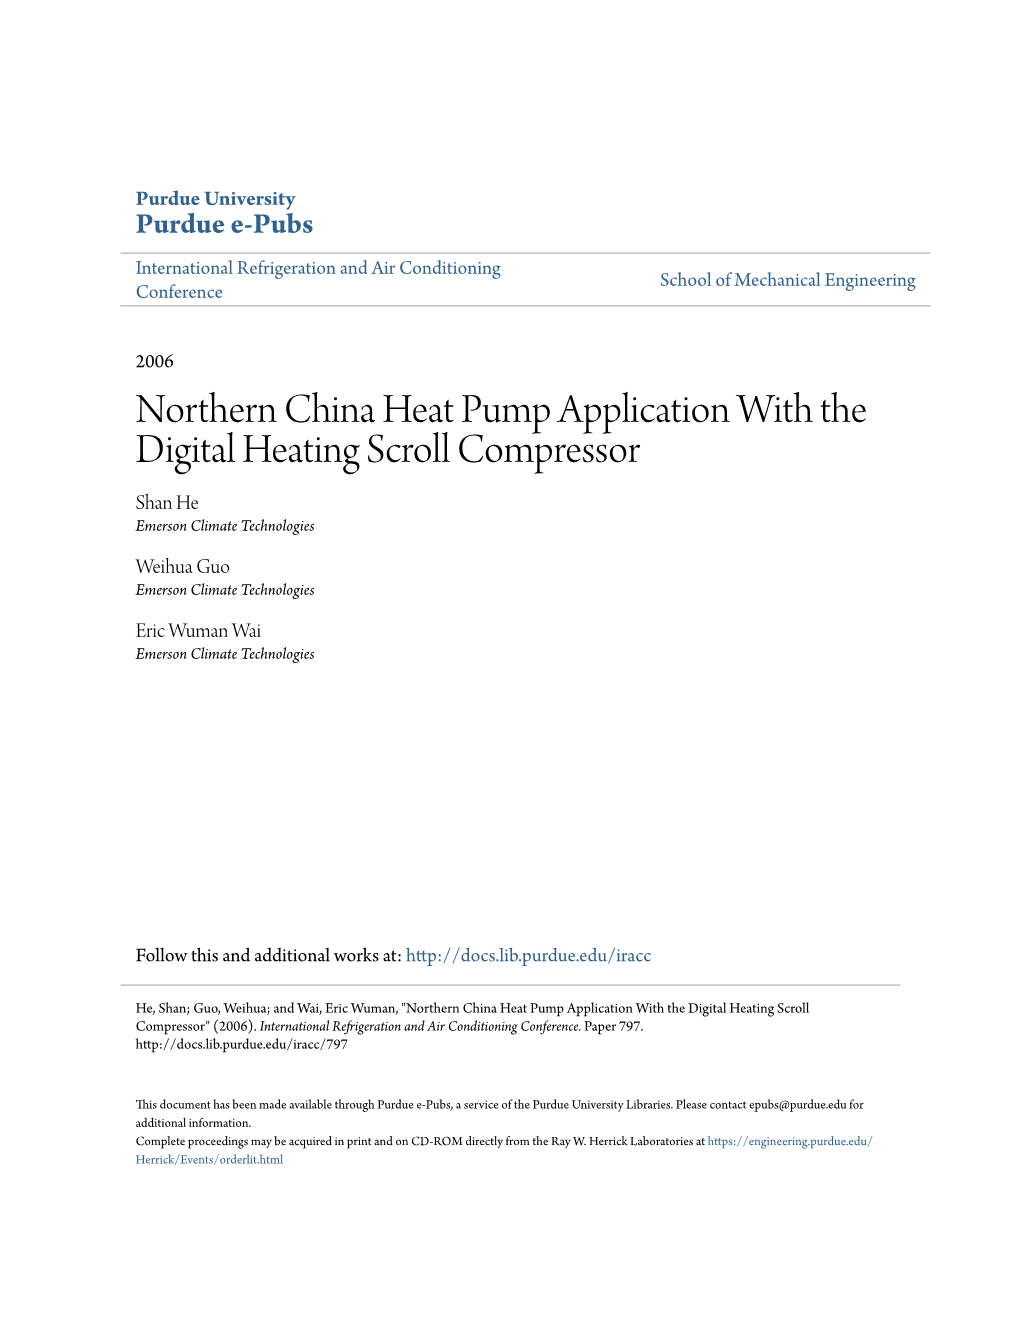 Northern China Heat Pump Application with the Digital Heating Scroll Compressor Shan He Emerson Climate Technologies